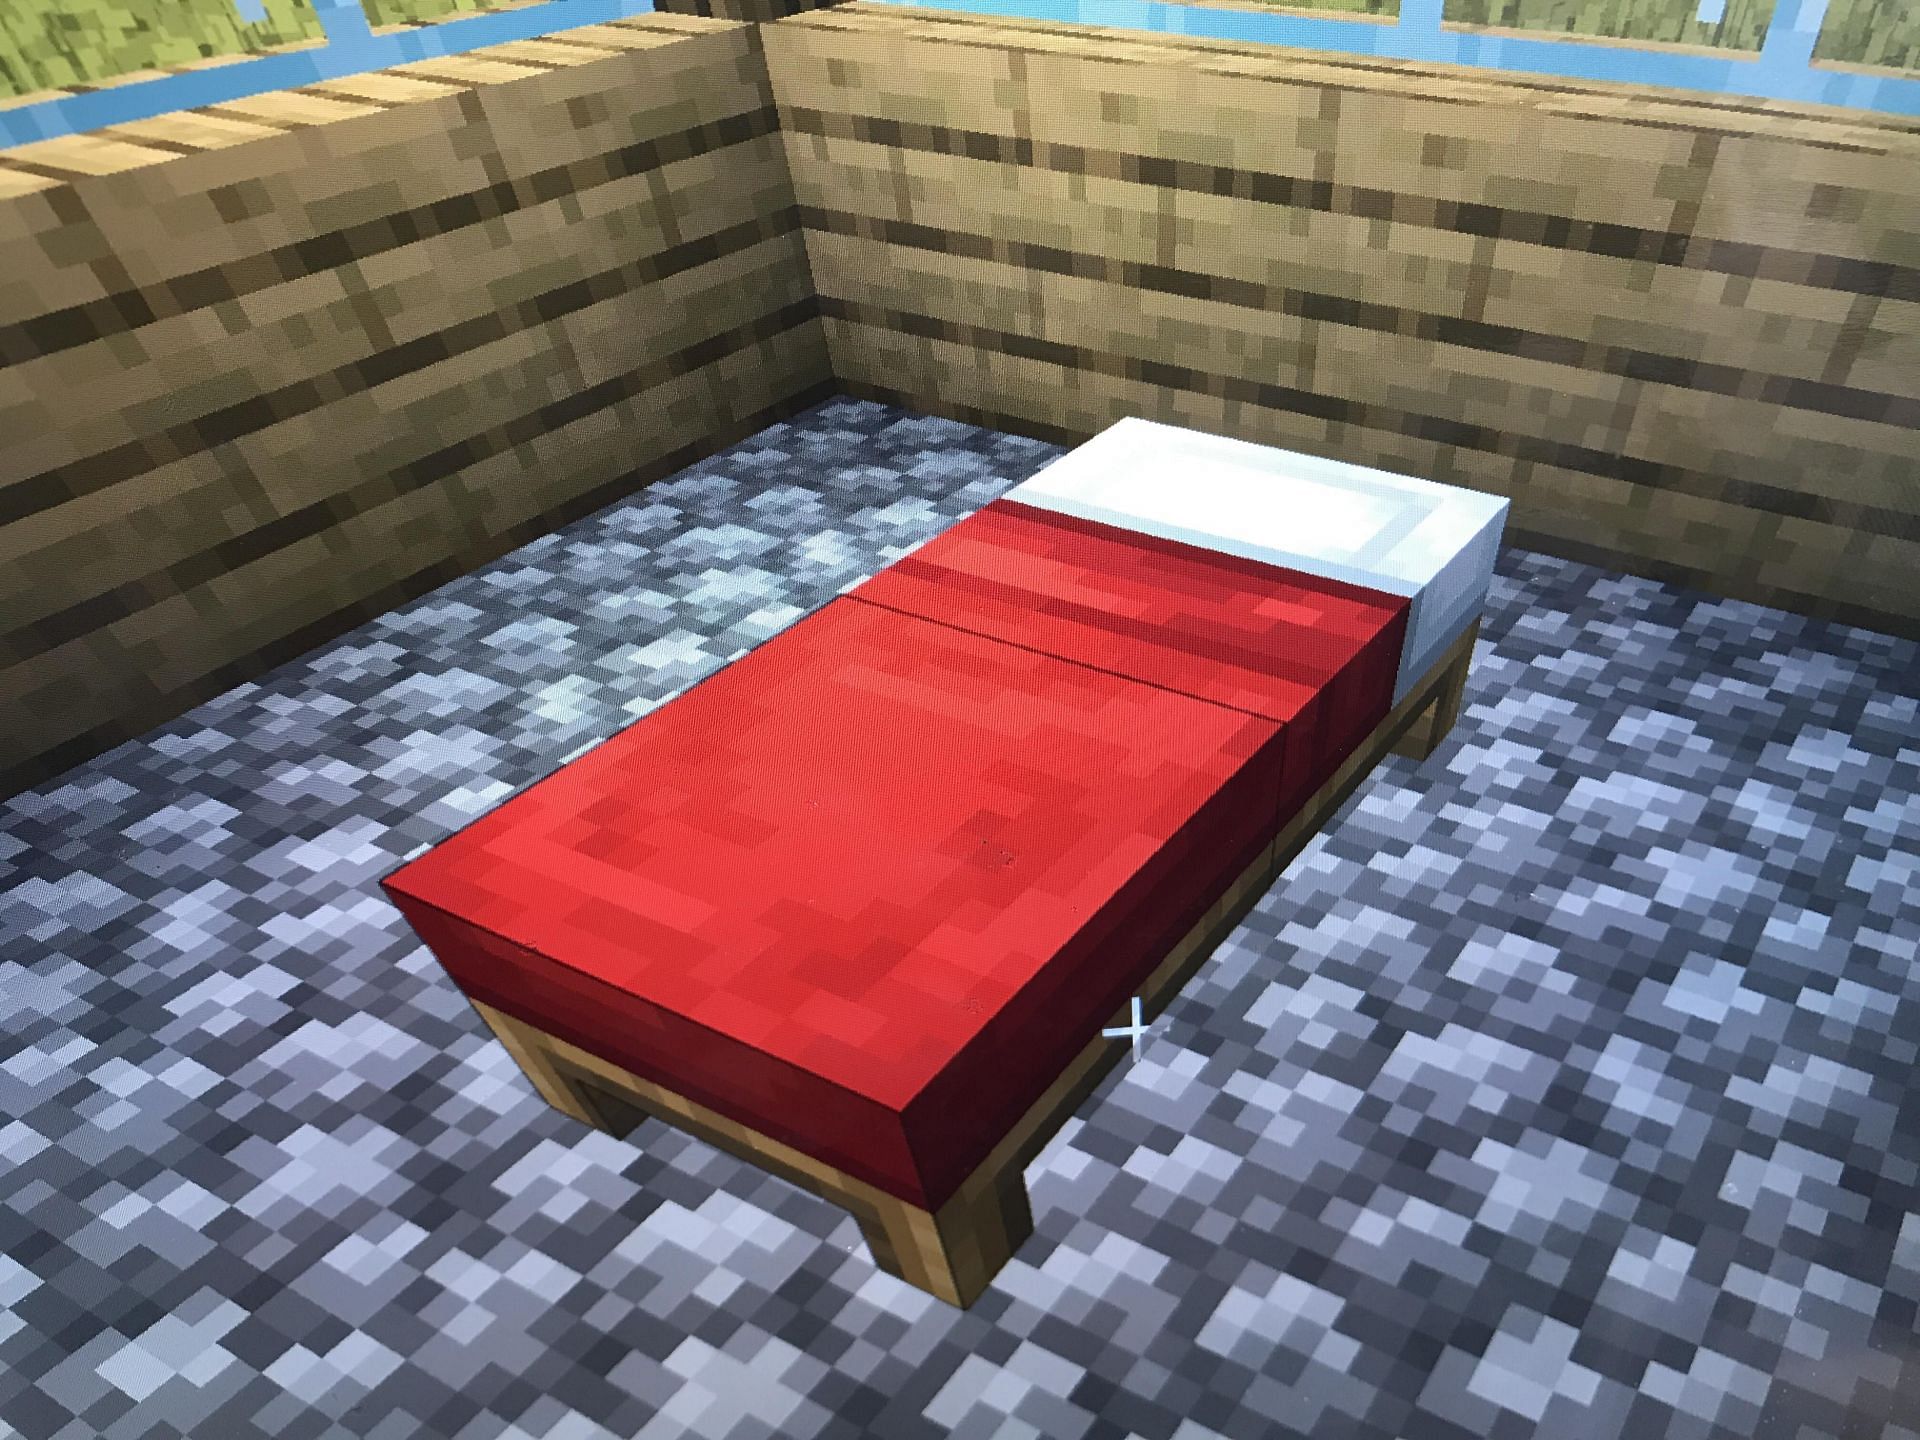 Bed in Minecraft (Image via Shizzels, YouTube)